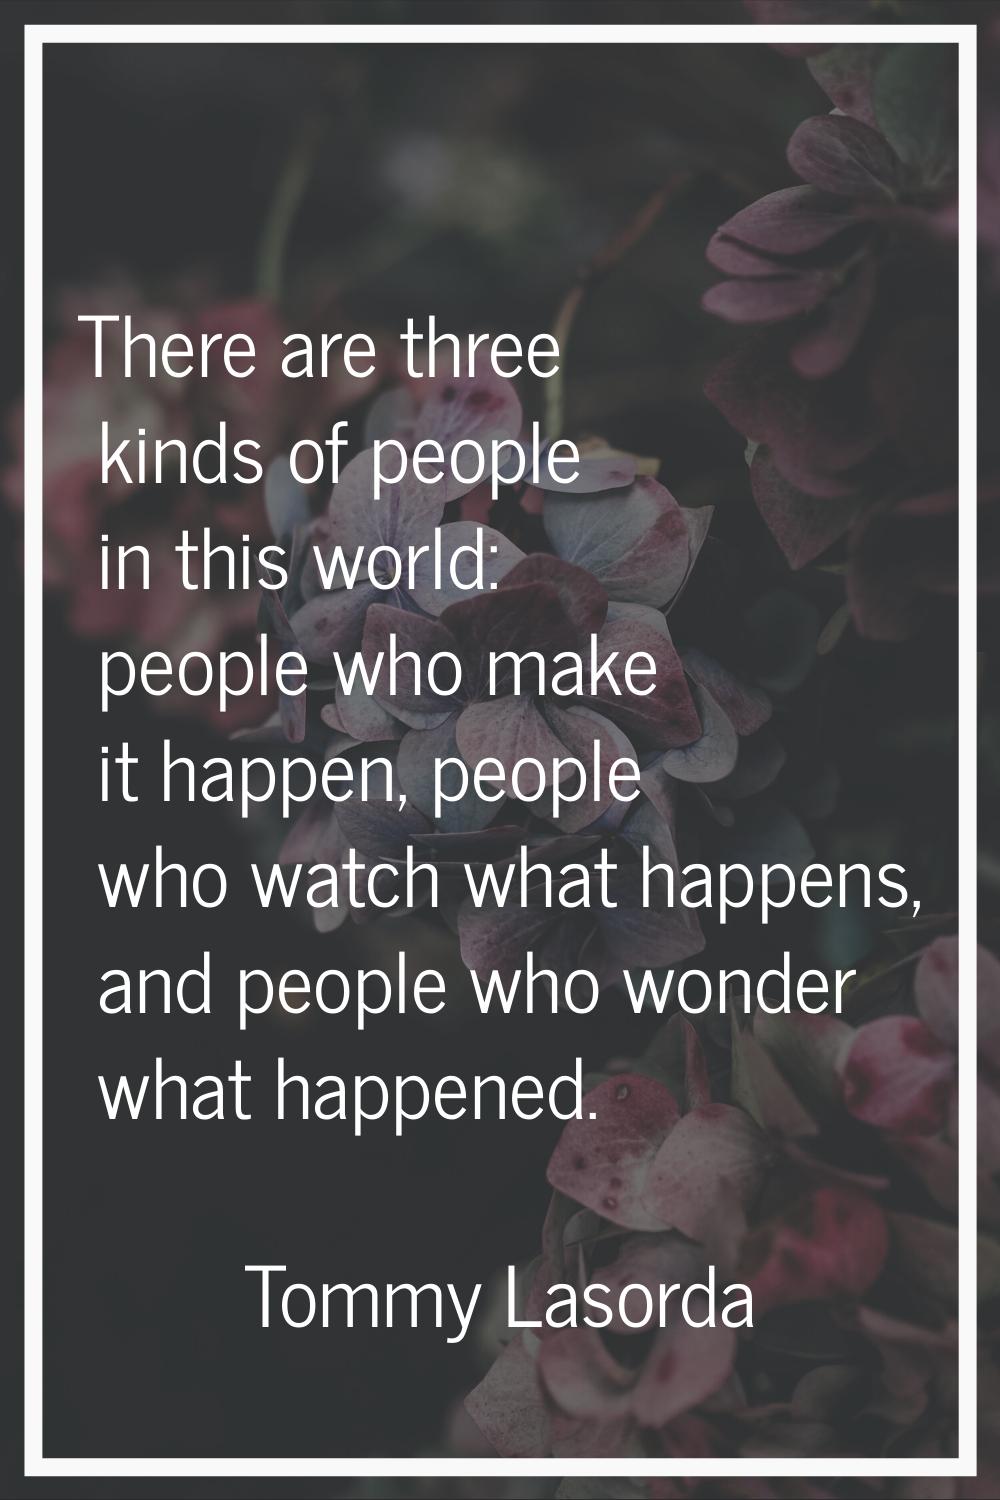 There are three kinds of people in this world: people who make it happen, people who watch what hap